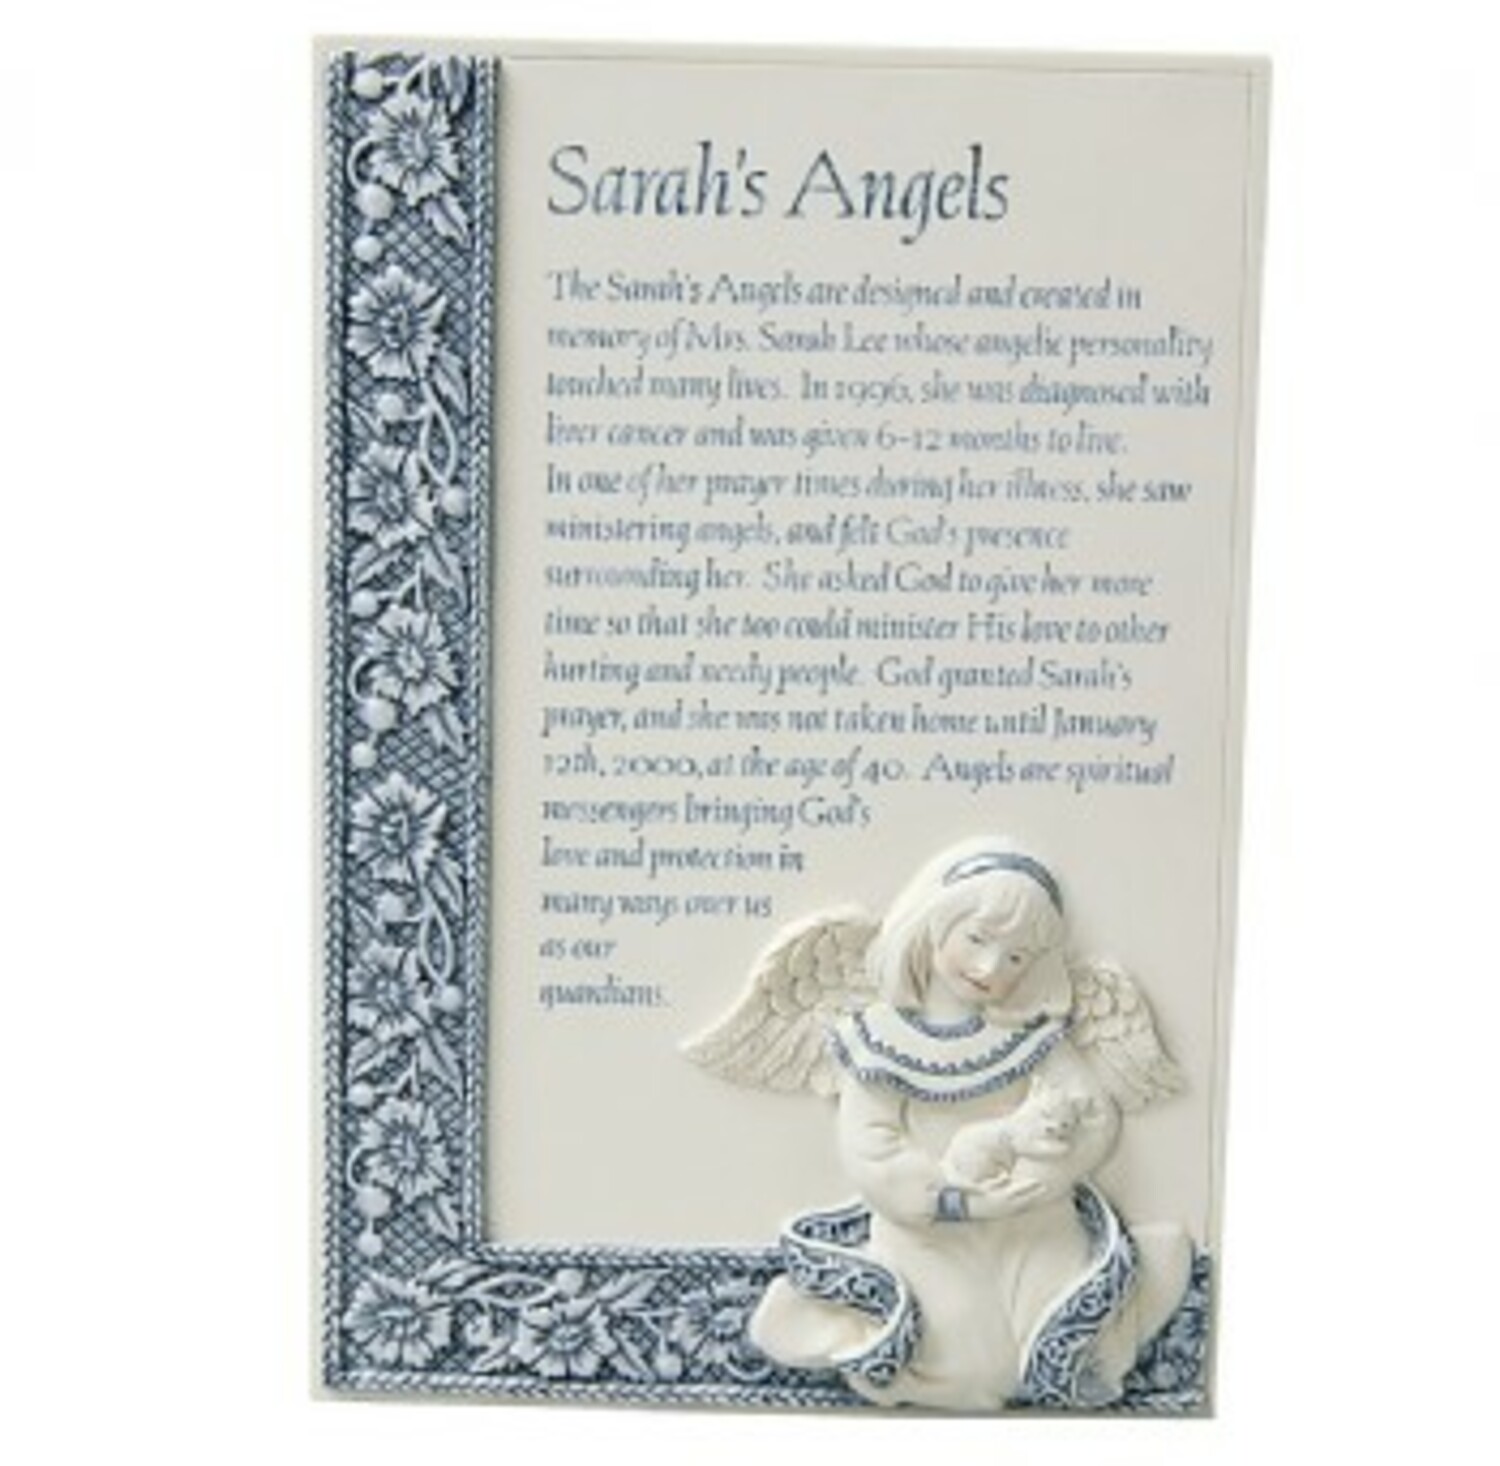 Sarah's Angels Story Plaque by Sarah's Angels - Sarah's Angels Story Plaque - 6" Plaque